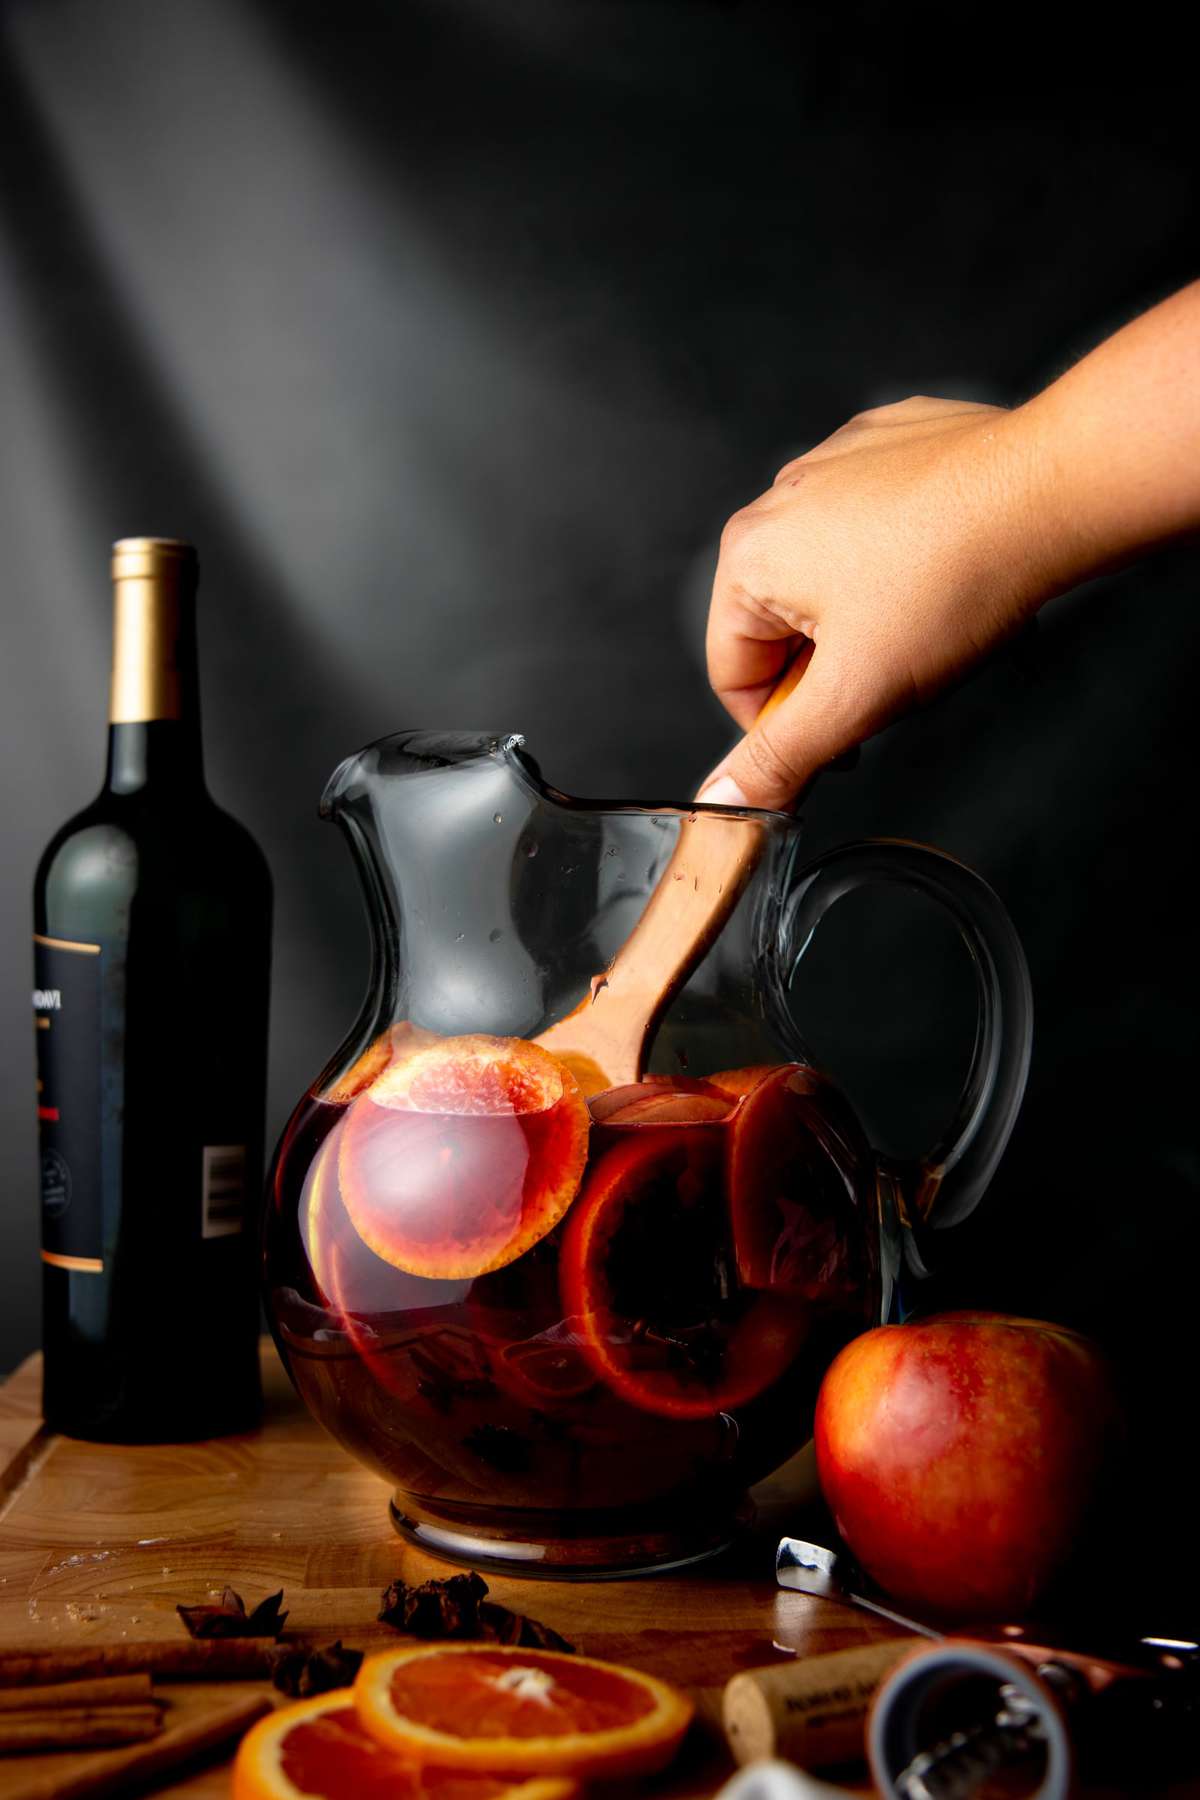 A hand holding a wooden spoon stirs a pitcher with sangria and fruit slices in it.